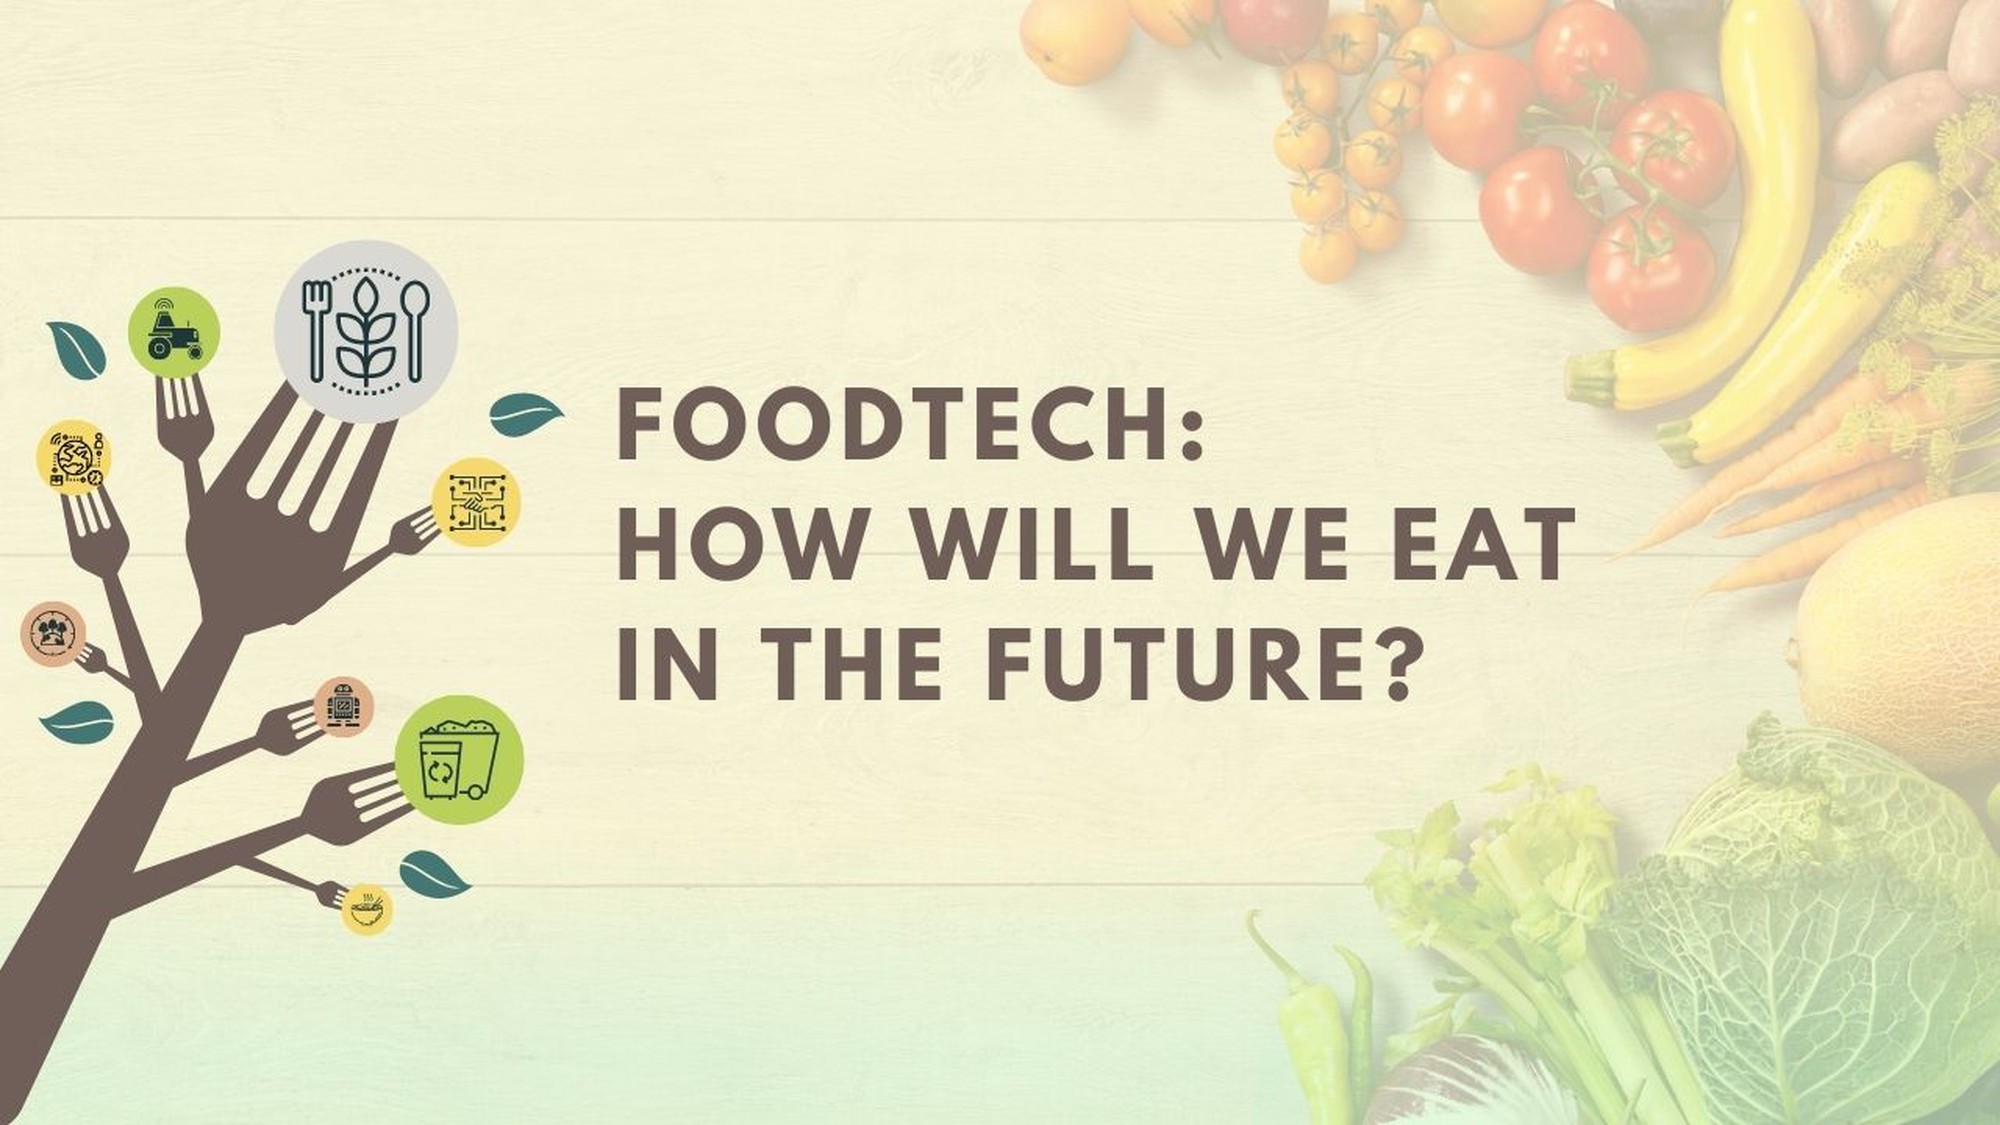 Discussing solutions in the fields of agritech, alternative foods and digital platforms for waste MANAGEment at the event “Foodtech: How Will We Eat in the Future?”